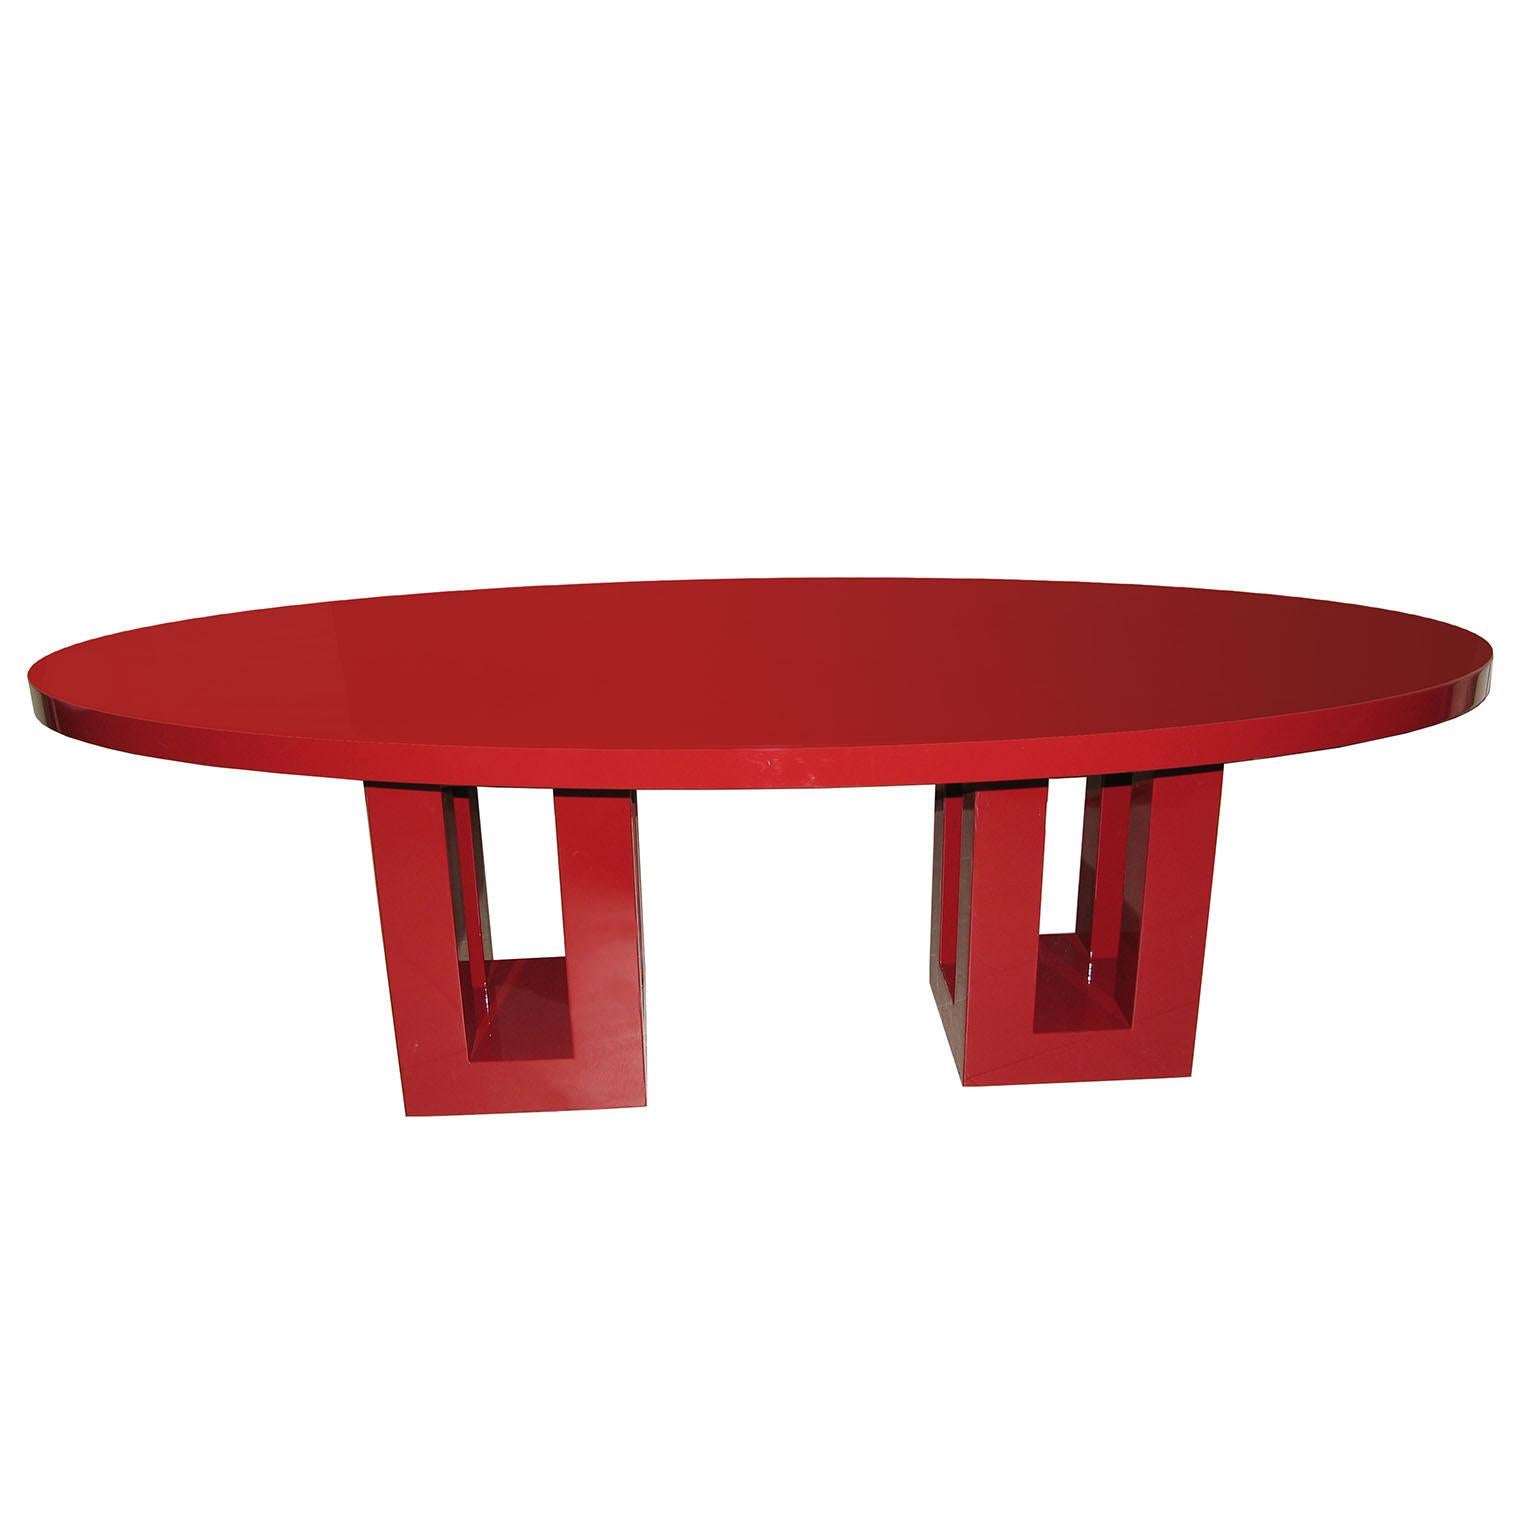 Lacquered Large Red Lacquer Oval Dinning Table. 8 Feet, Francois Champsaur, France 1990s For Sale